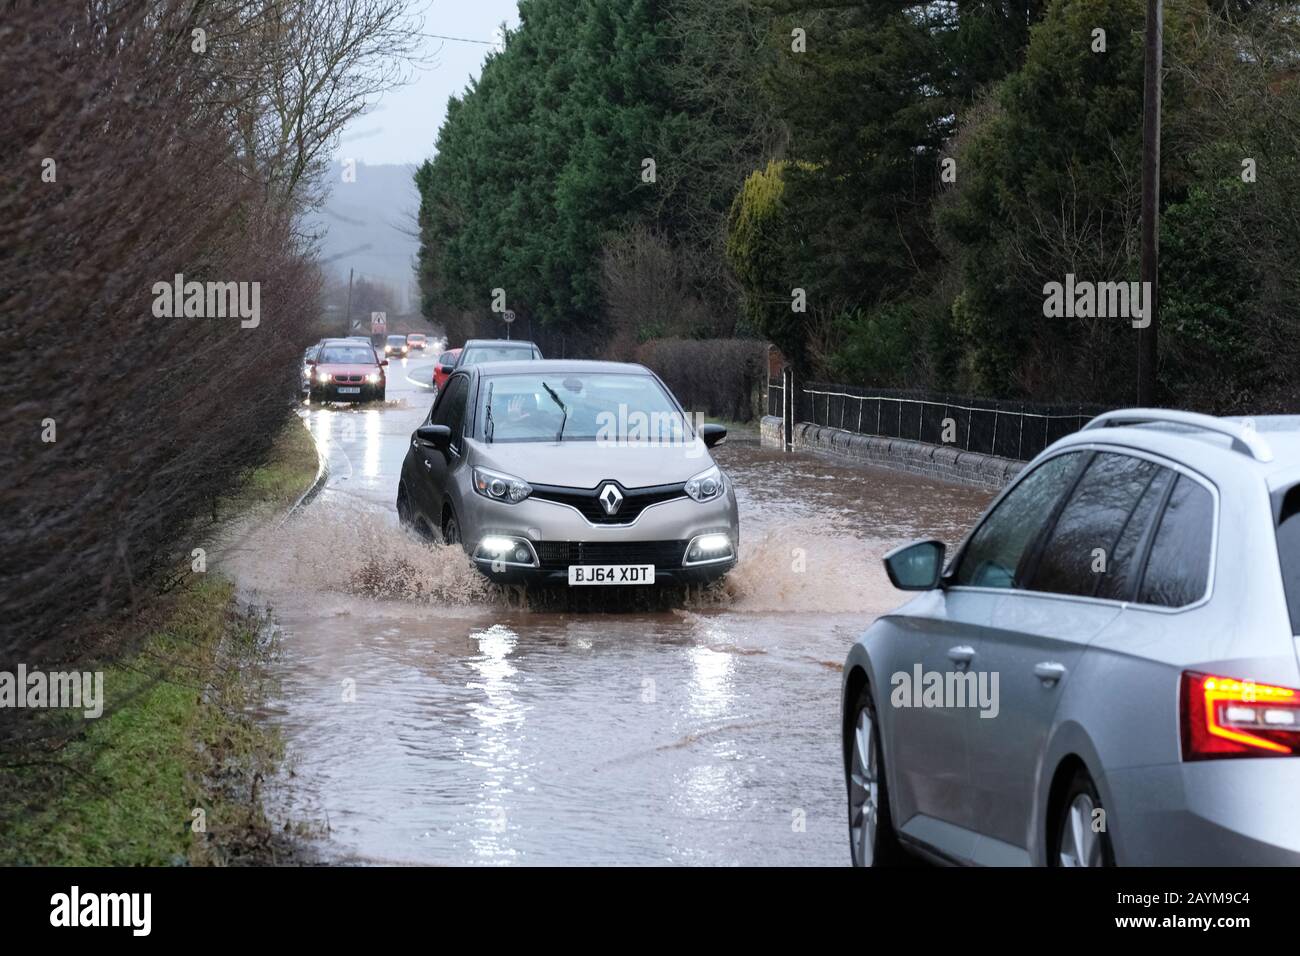 A49 road, Moreton on Lugg, Herefordshire, UK - Sunday 16th February 2020 heavy overnight rain has brought flooding to the A49 between Hereford and Leominster, the only main trunk road through the county, at Moreton on Lugg just north of Hereford city. Photo Steven May / Alamy Live News Stock Photo